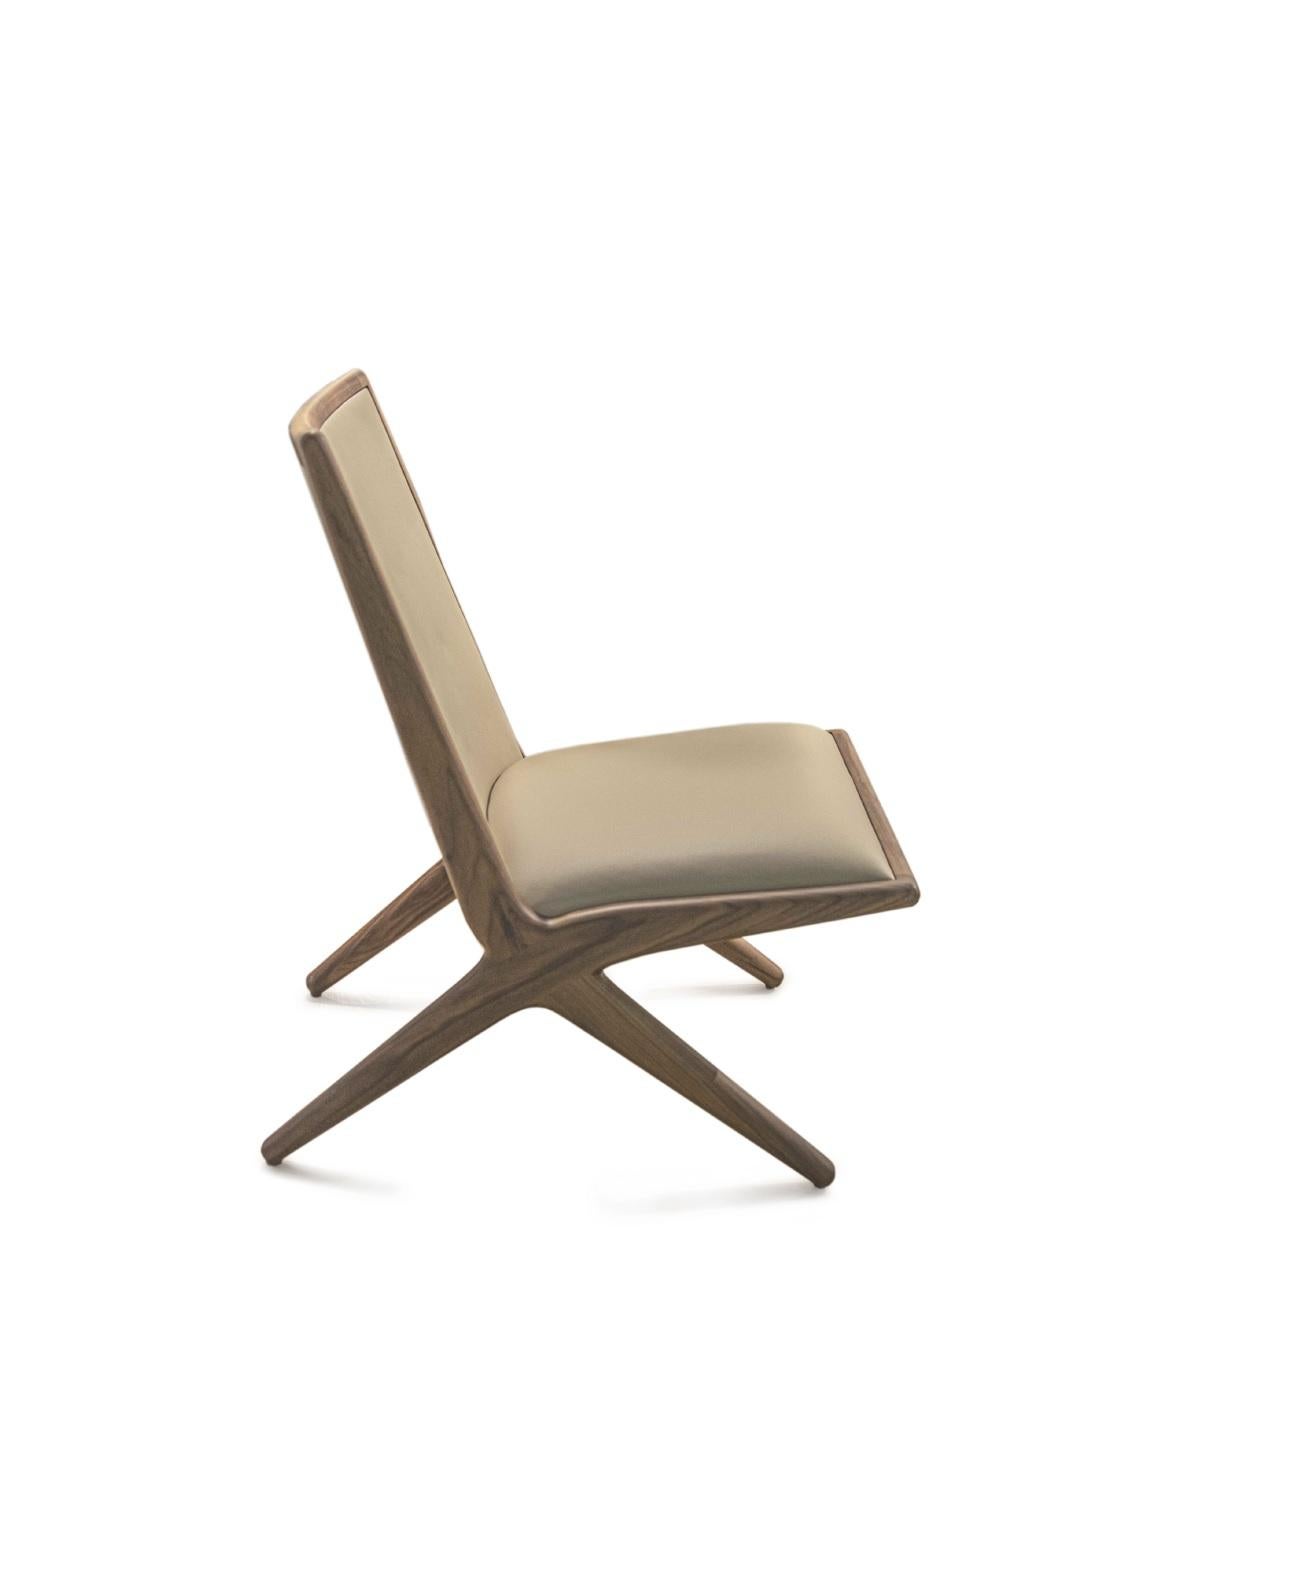 Walnut Kaya lounge chair by LK Edition
Dimensions: 75.7 x 68 x H 86.3 cm
Materials: Walnut. Leather. 
Also available in oak and without leather.

It is with the sense of detail and requirement, this research of the exception by the selection of